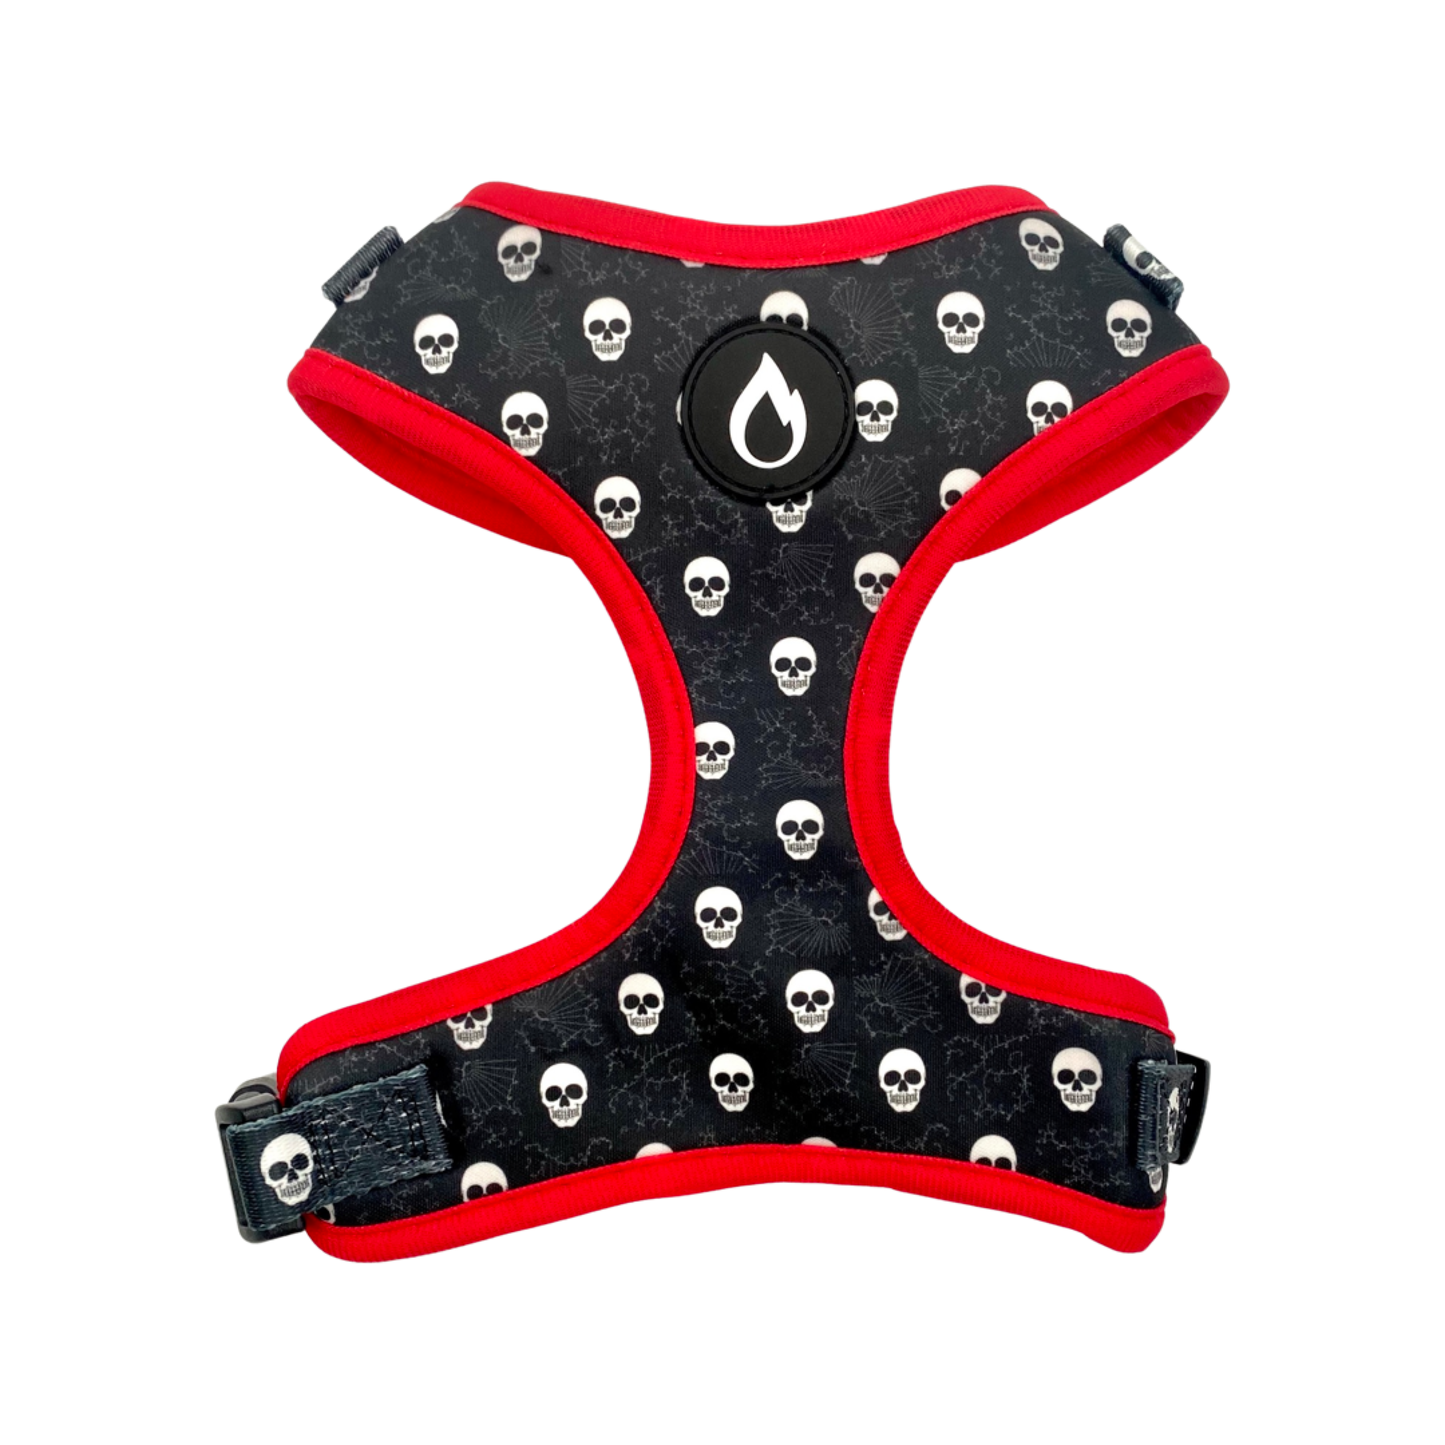 dog harness, puppy harness, notorious dog, australian, skulls, black, red, sizzzle dog accessories, adjustable, affordable, custom prints, pet supplies, designer